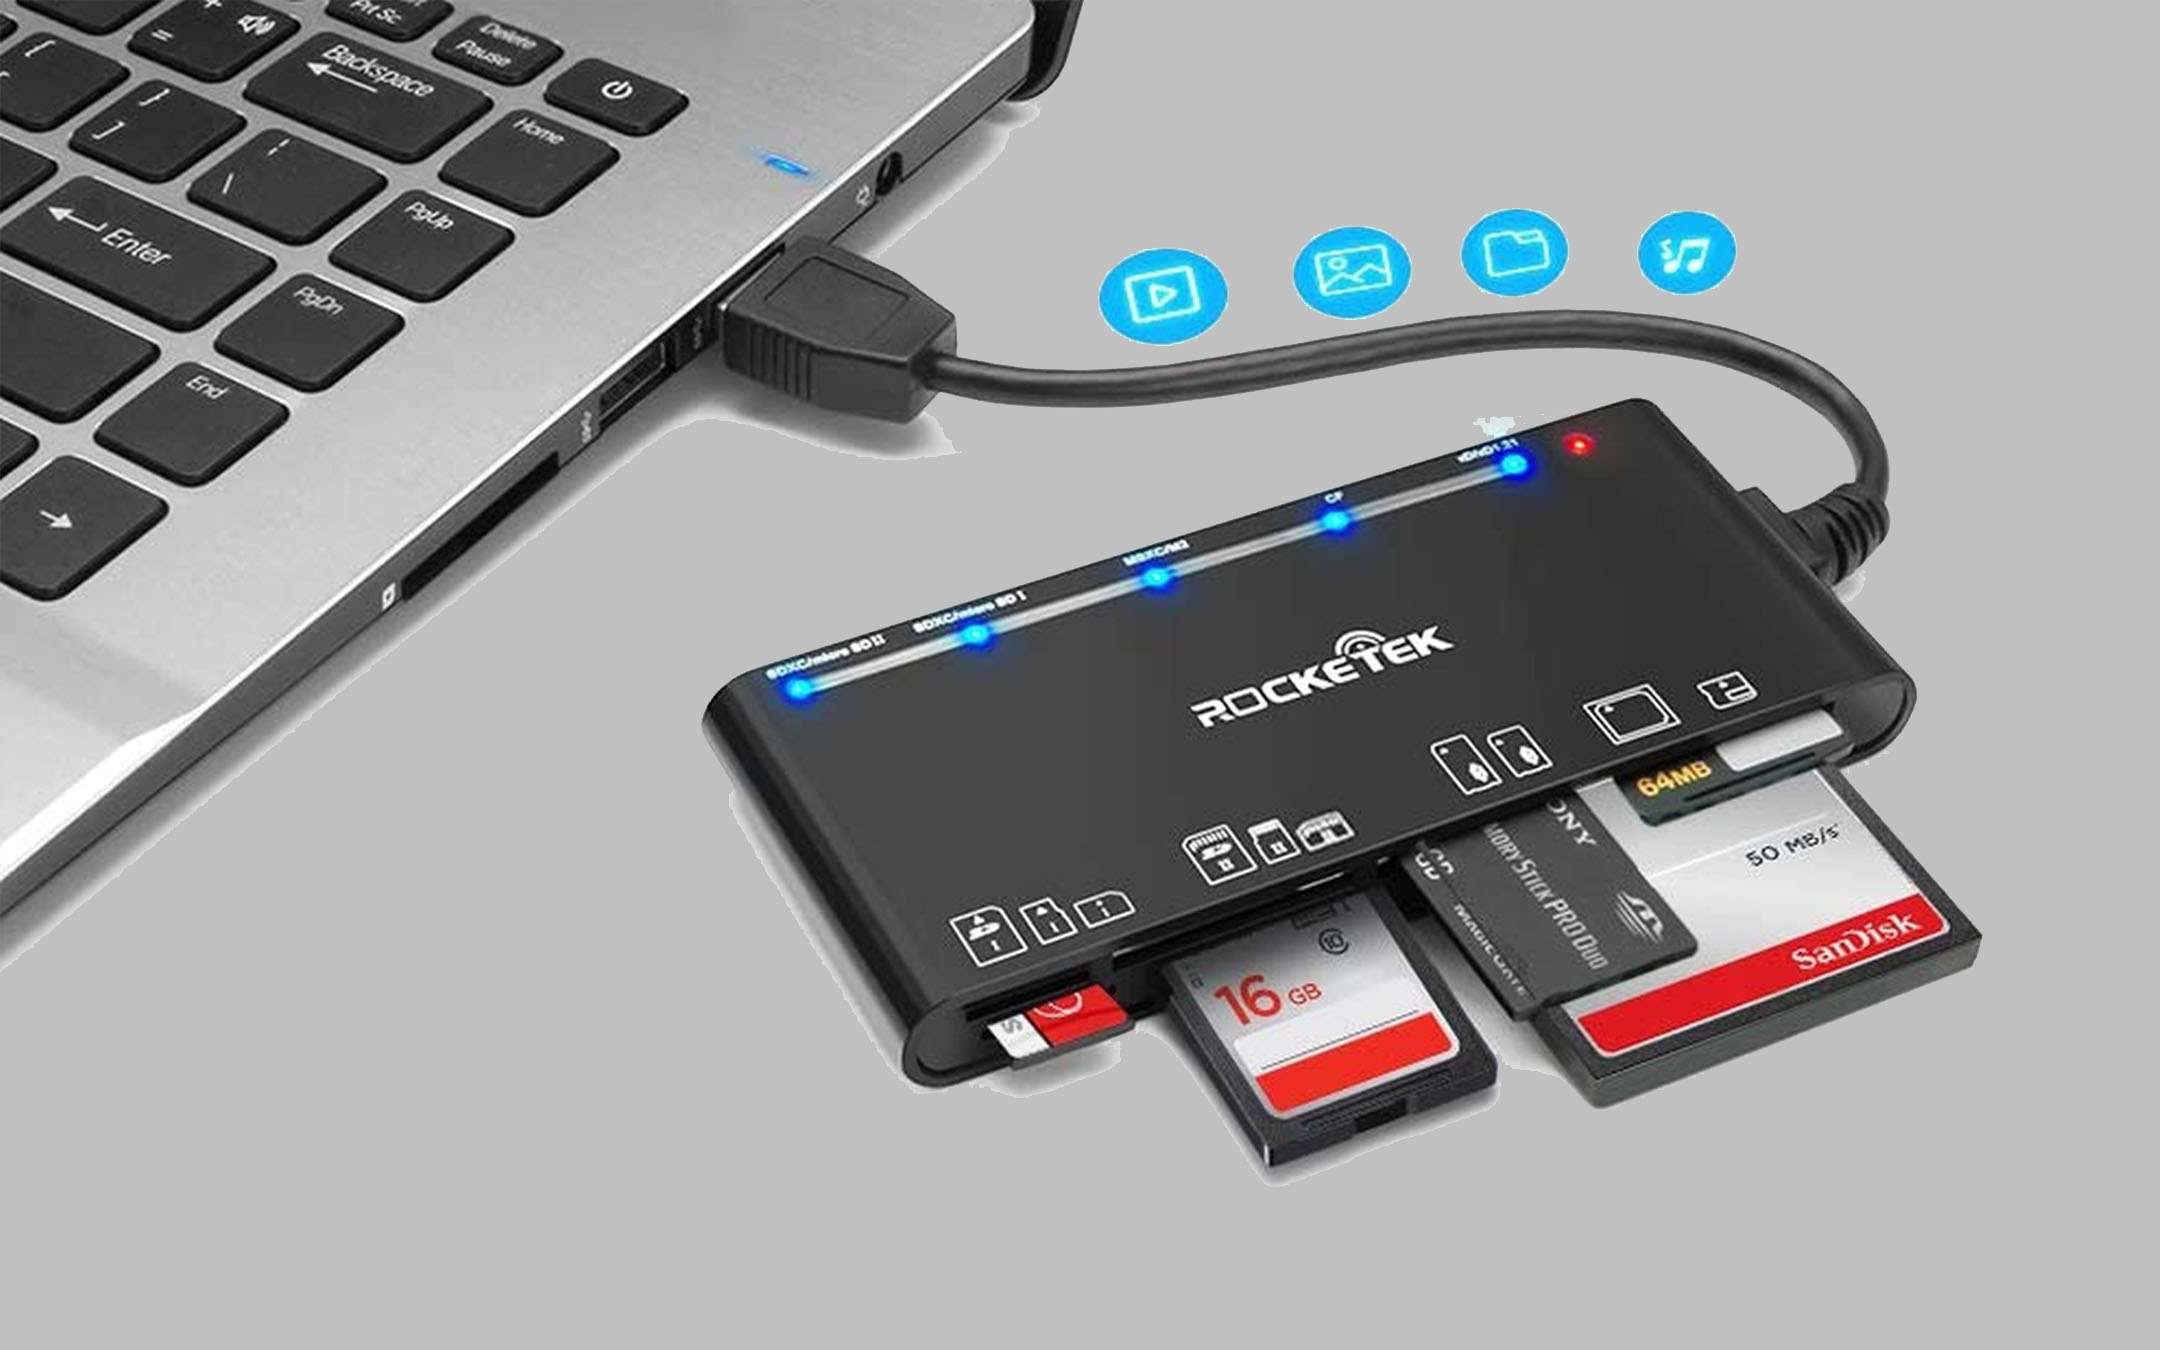 7-in-1 card reader, flash offer on Amazon